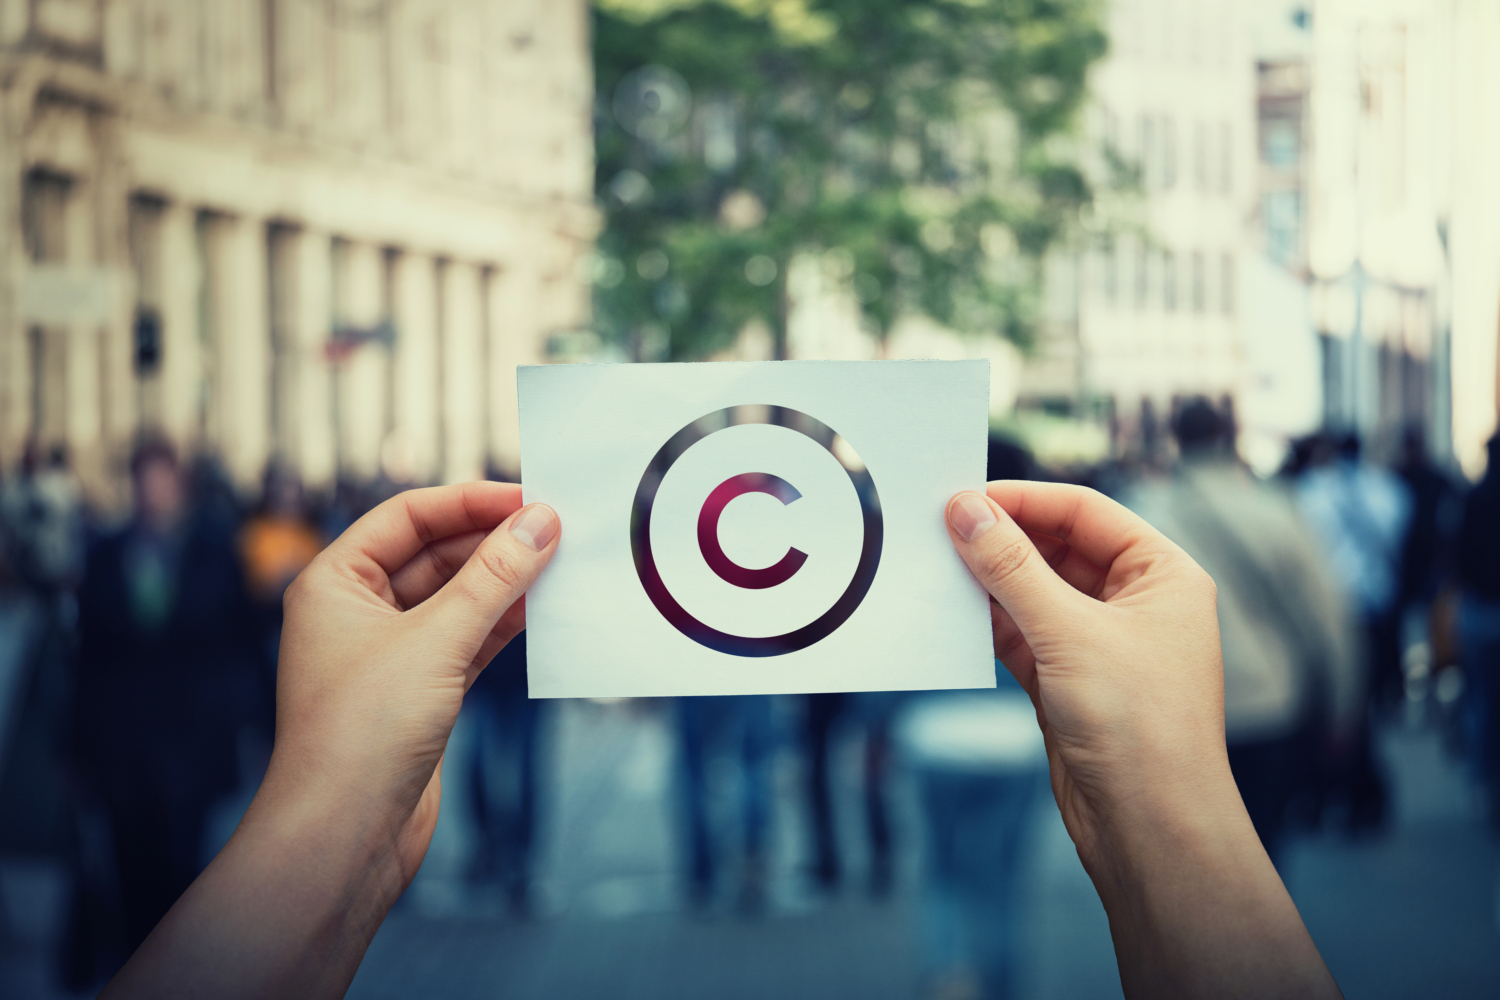 CASE Act Copyright Small Claims Court Pruvent PLLC